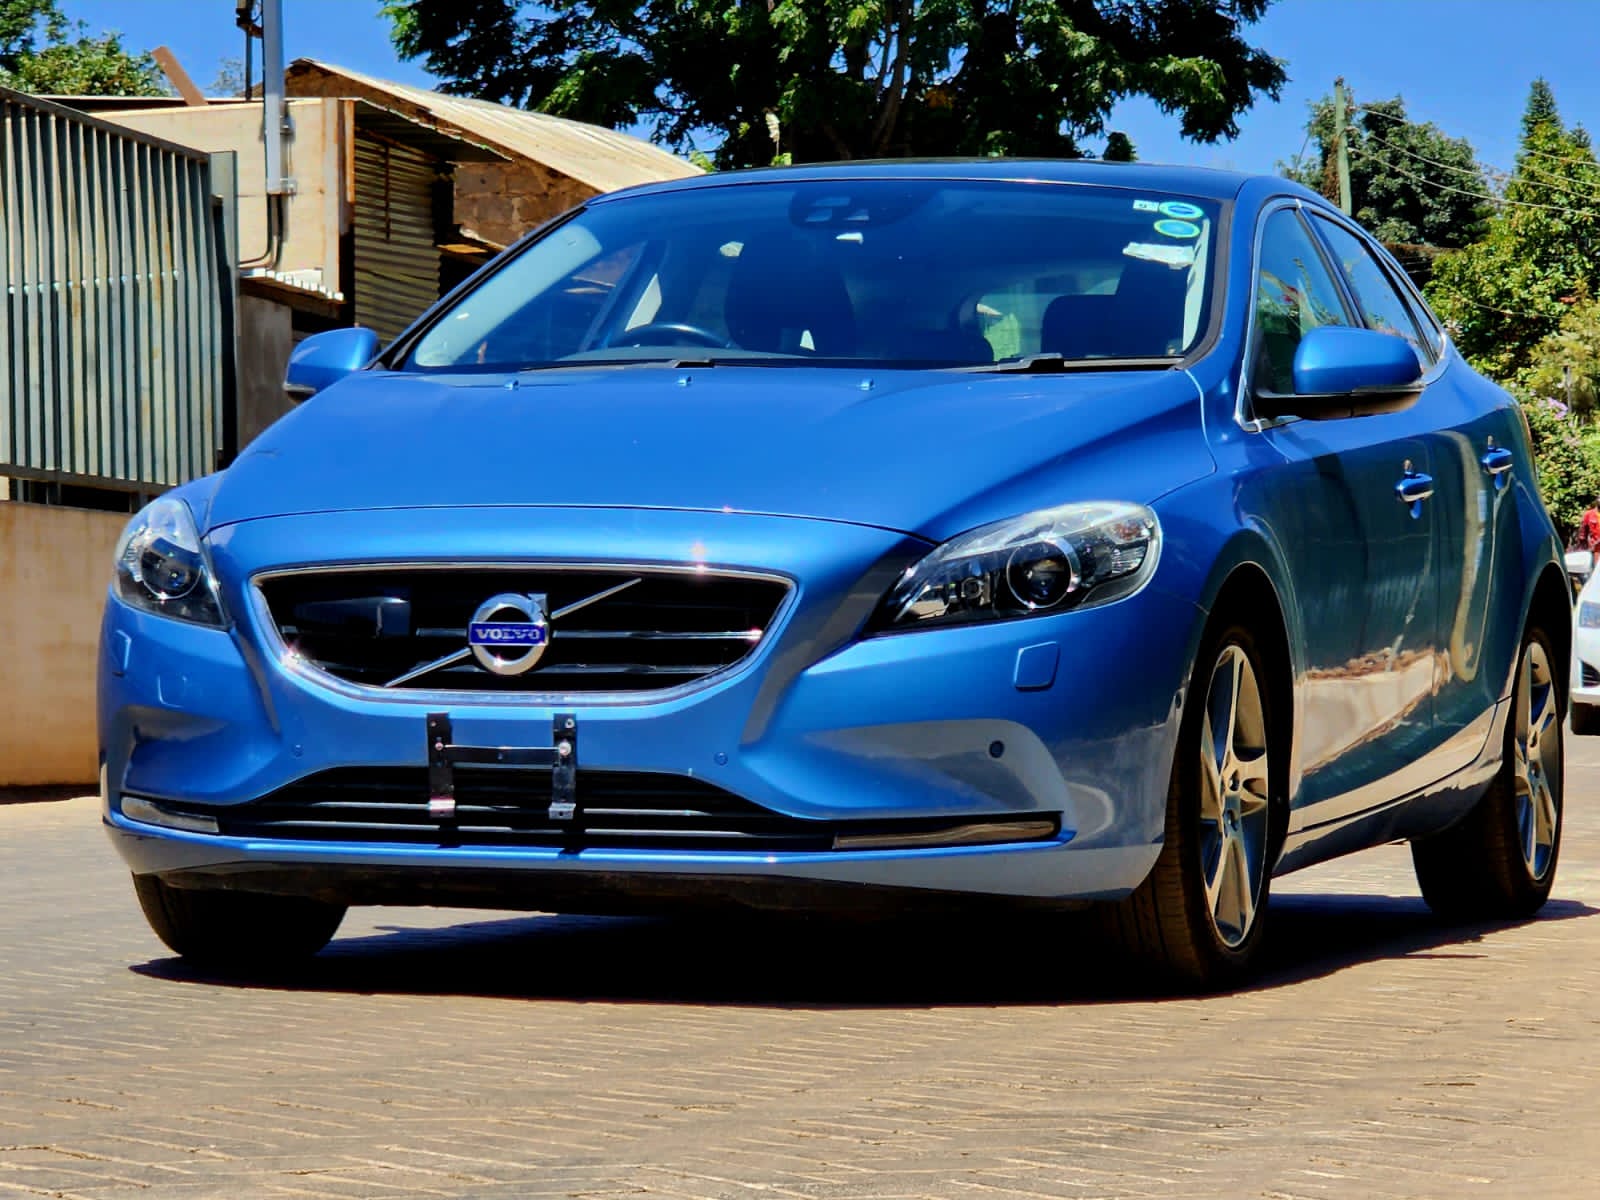 Volvo V40 D4 2015 with SUNROOF CHEAPEST You Pay 30% DEPOSIT TRADE IN OK